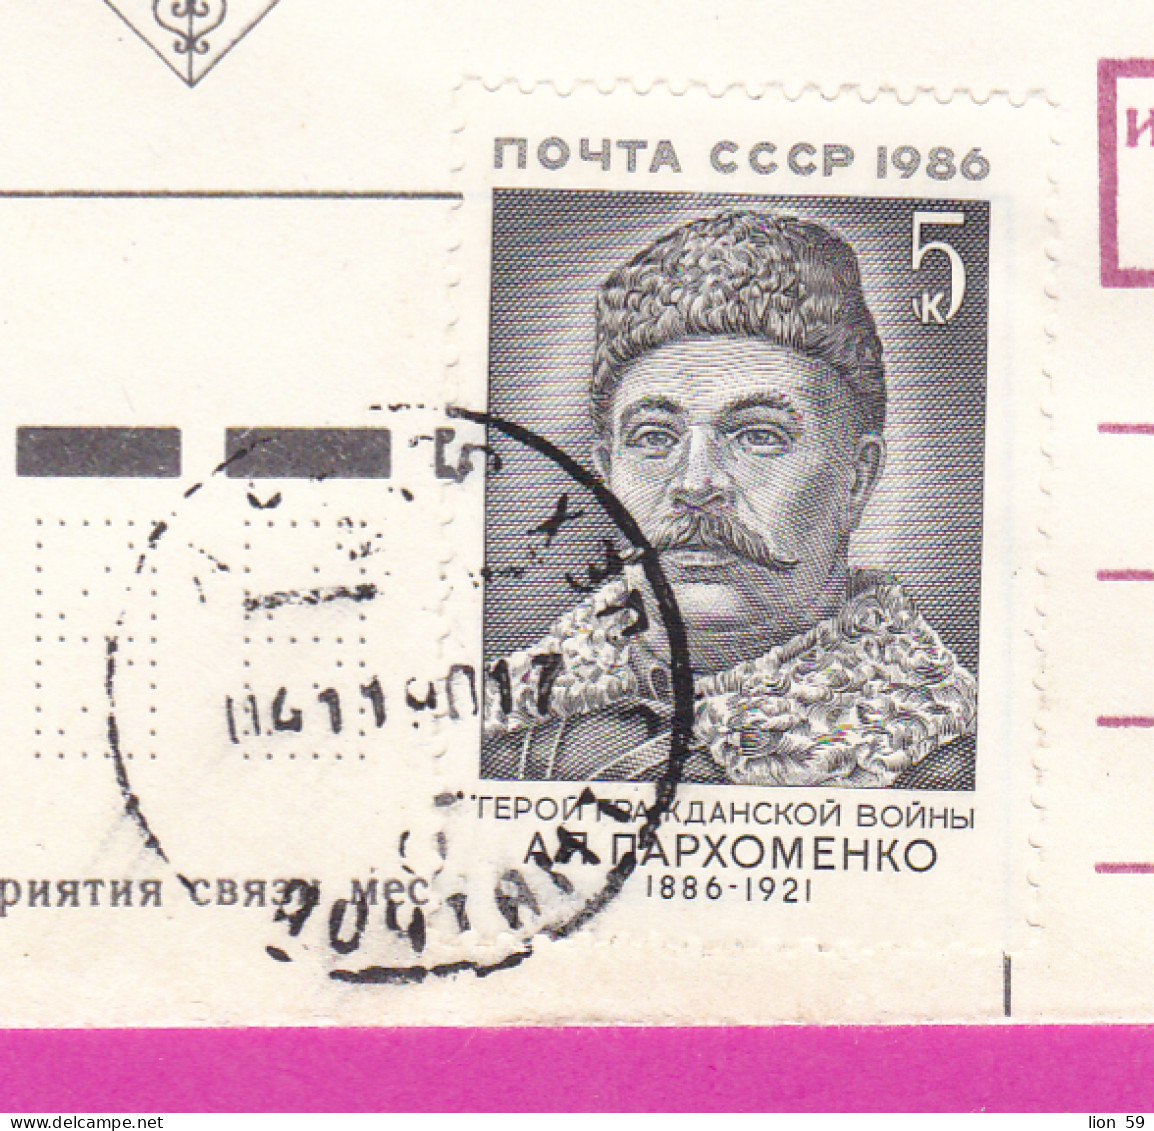 296049 / Recommande Russia 1988 - 5+5 K. - Great Northern Expedition Vasily Pronchishchev , Moscow BG Stationery Cover - Explorateurs & Célébrités Polaires